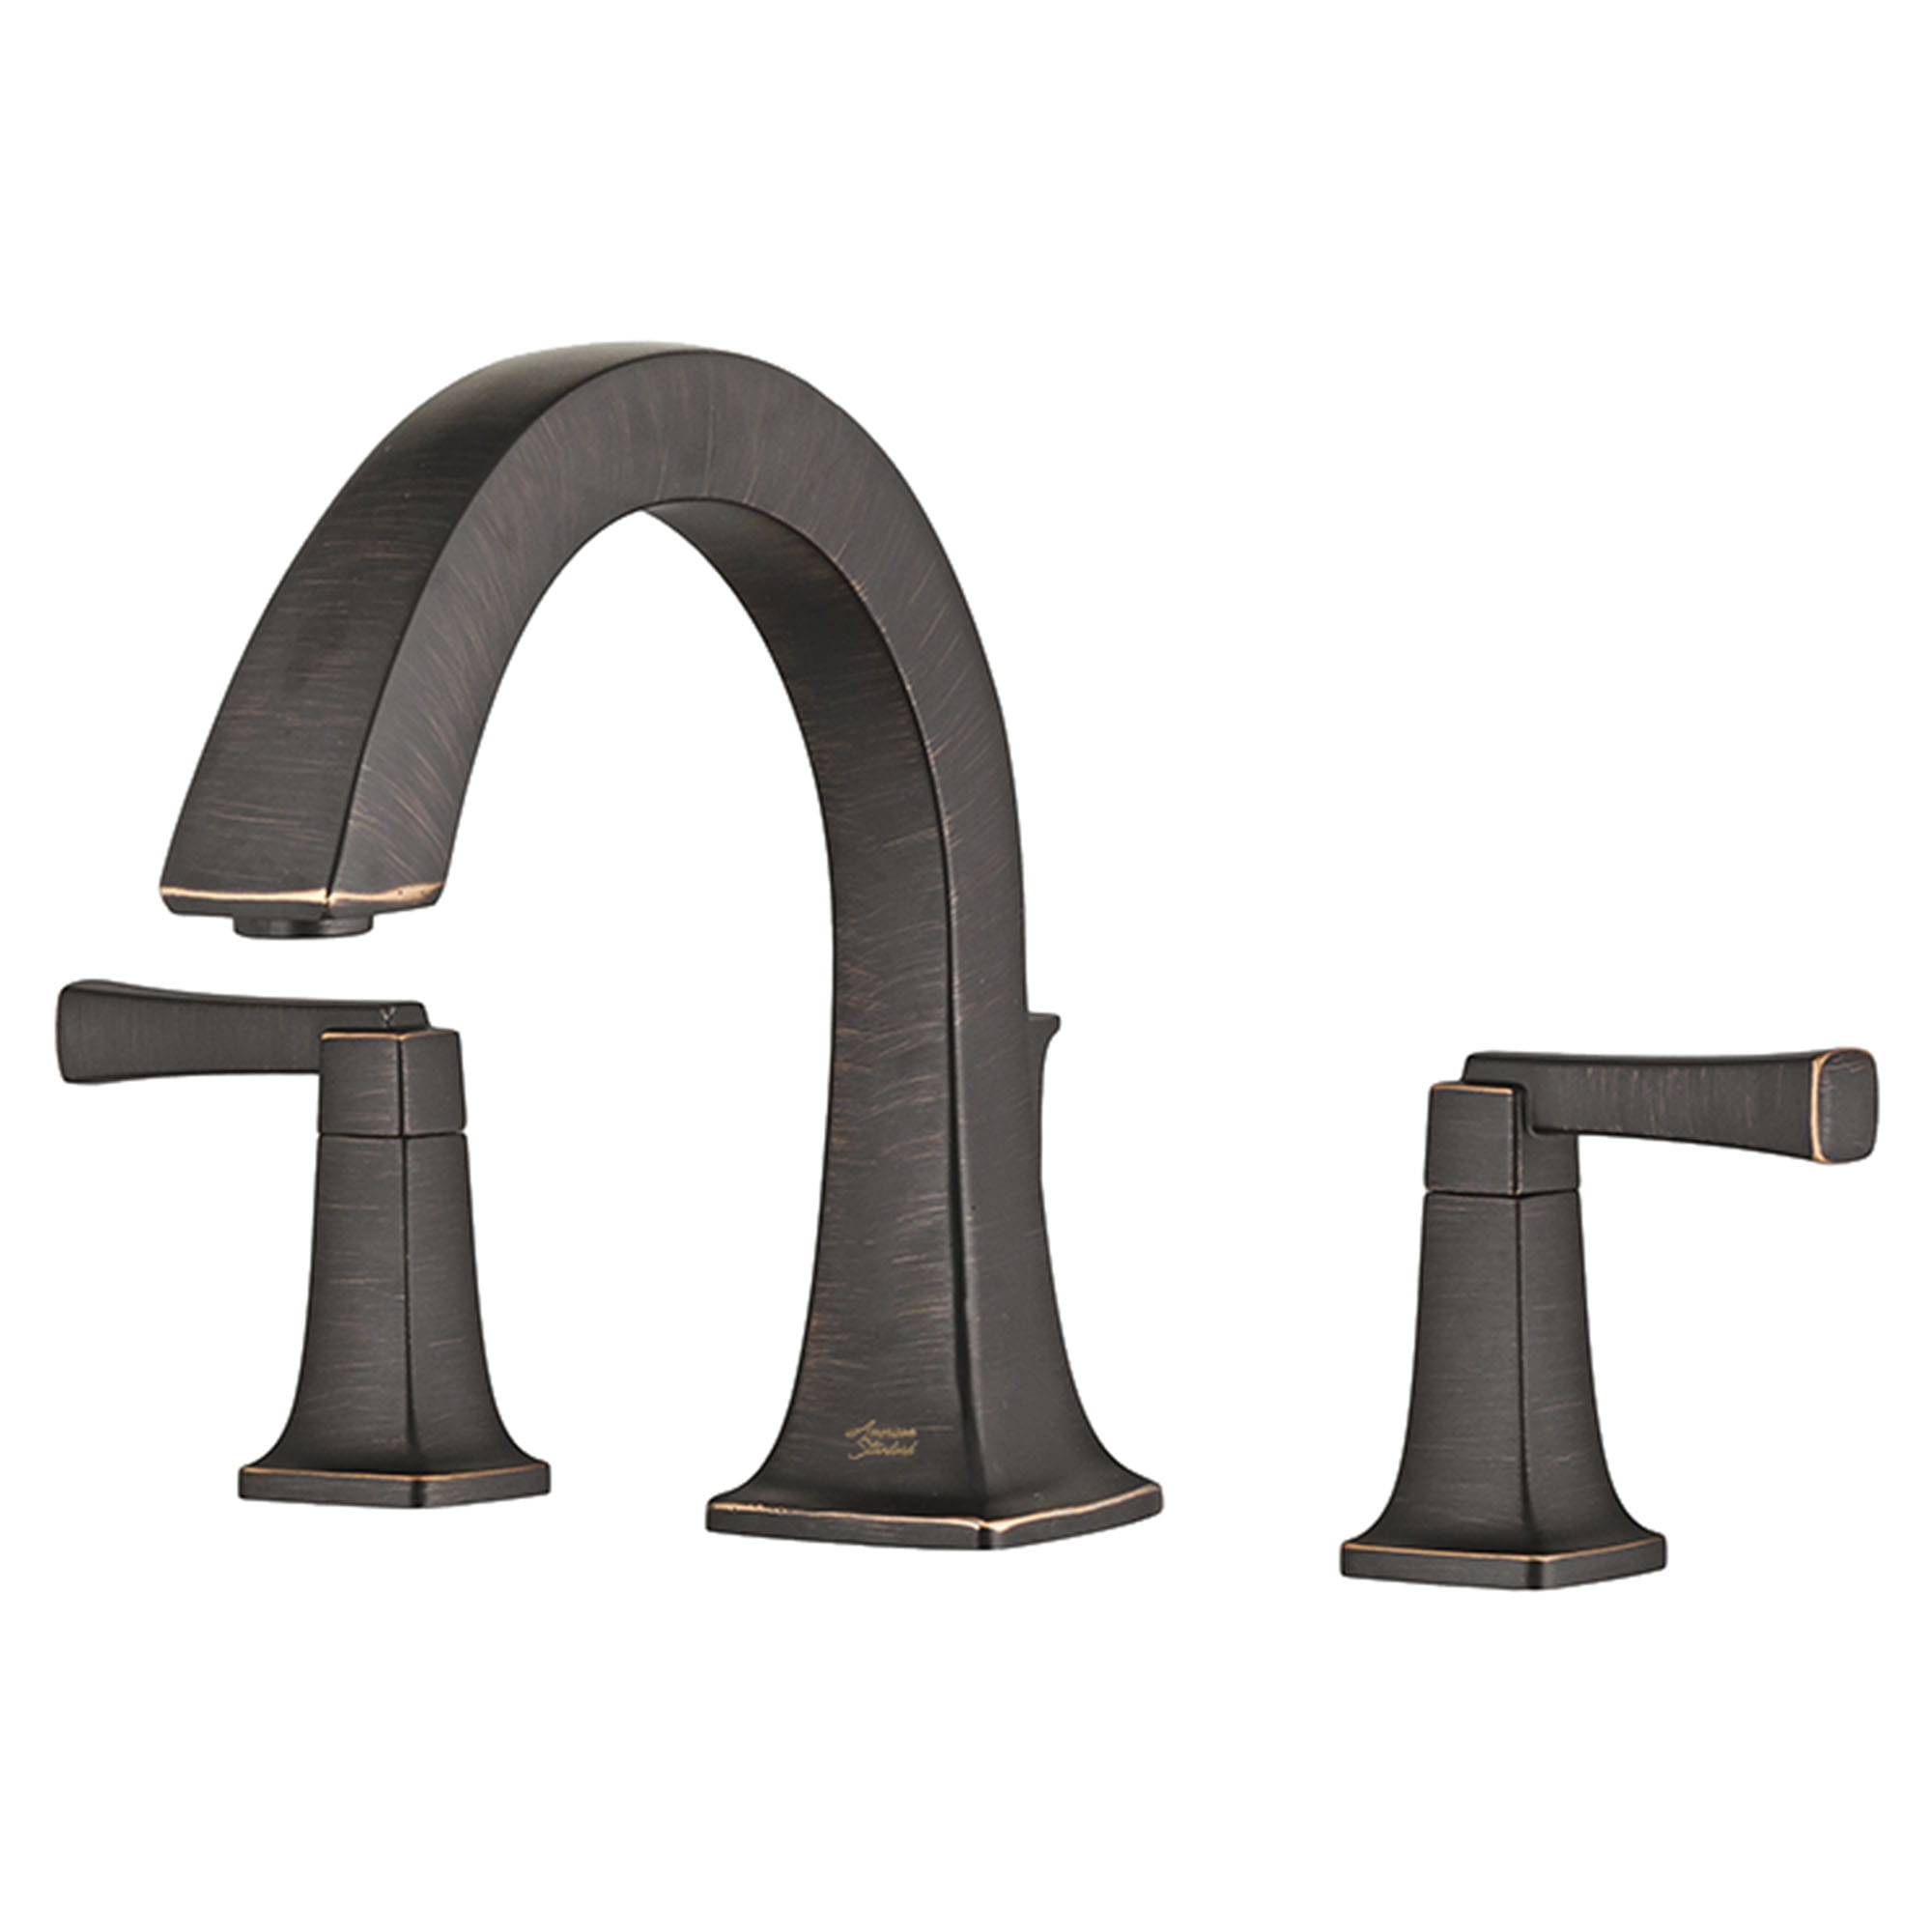 Townsend Bathtub Faucet With Lever Handles for Flash Rough In Valve LEGACY BRONZE